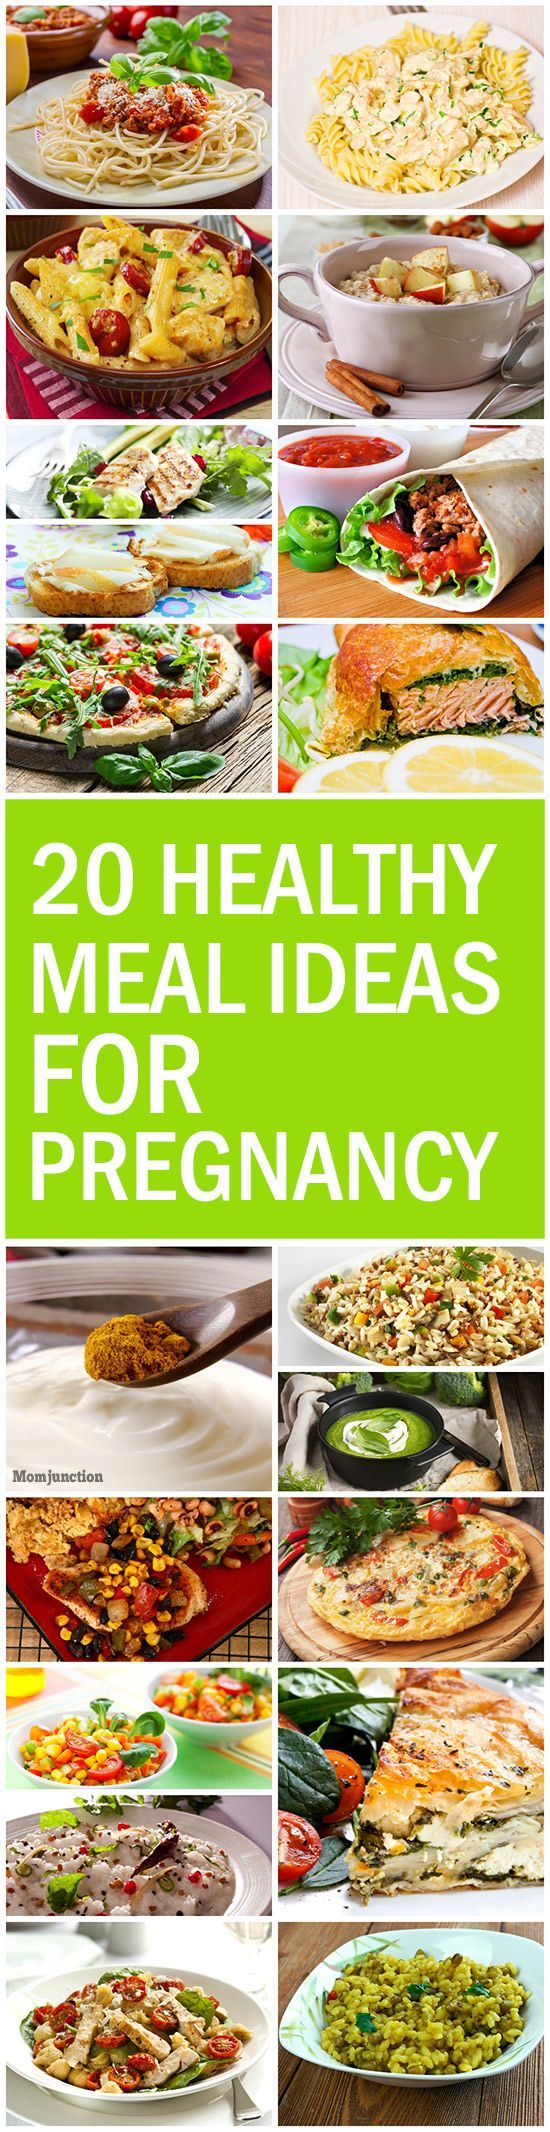 20 Healthy Meal Ideas For Pregnancy: If you are looking for simple meal ideas that will be easy to make and delicious to eat